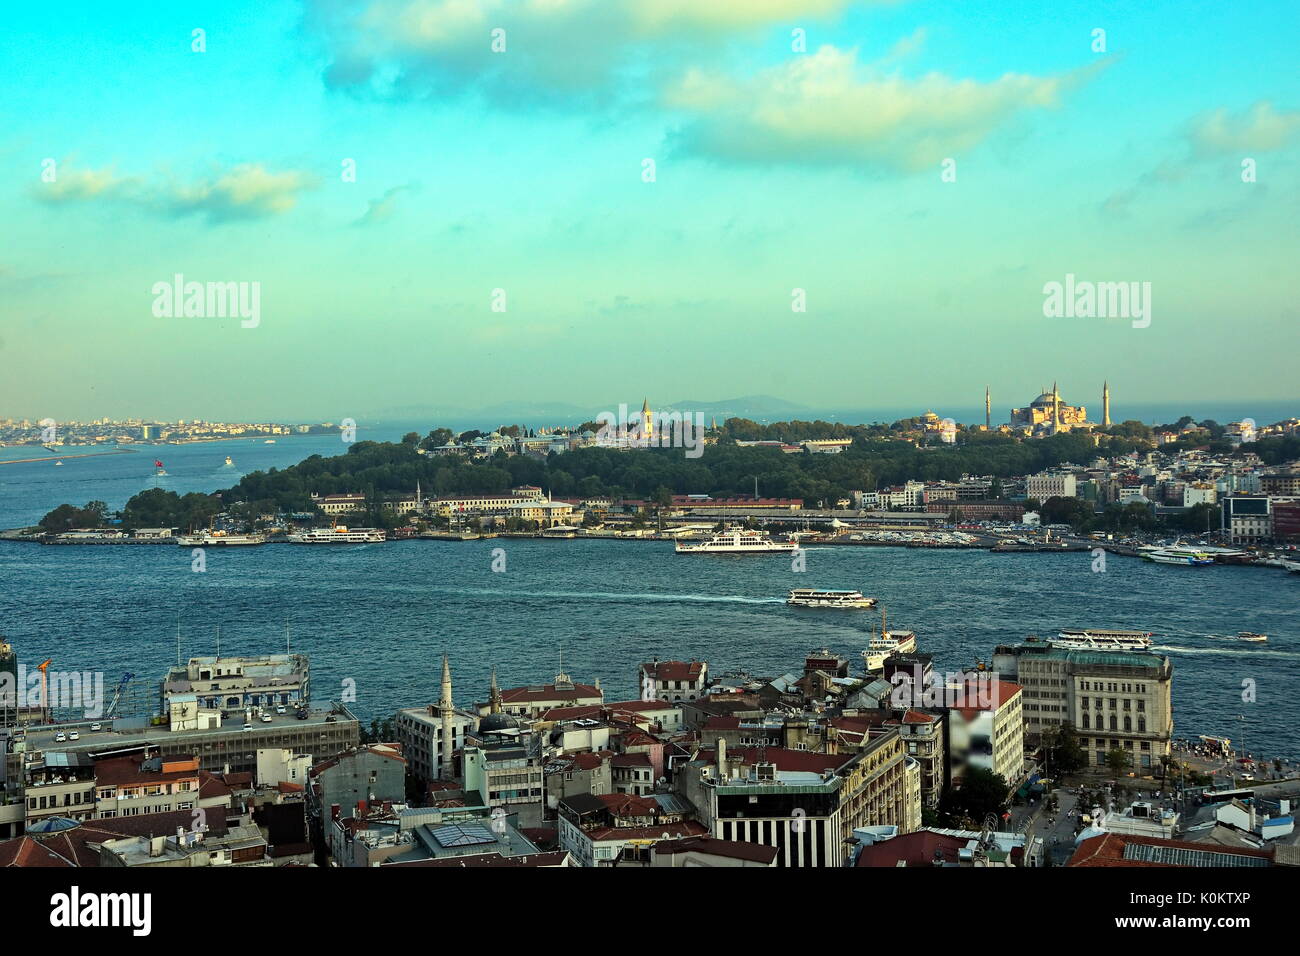 Istanbul old city skyline from top of Galata tower, Fatih, Istanbul, Turkey Stock Photo